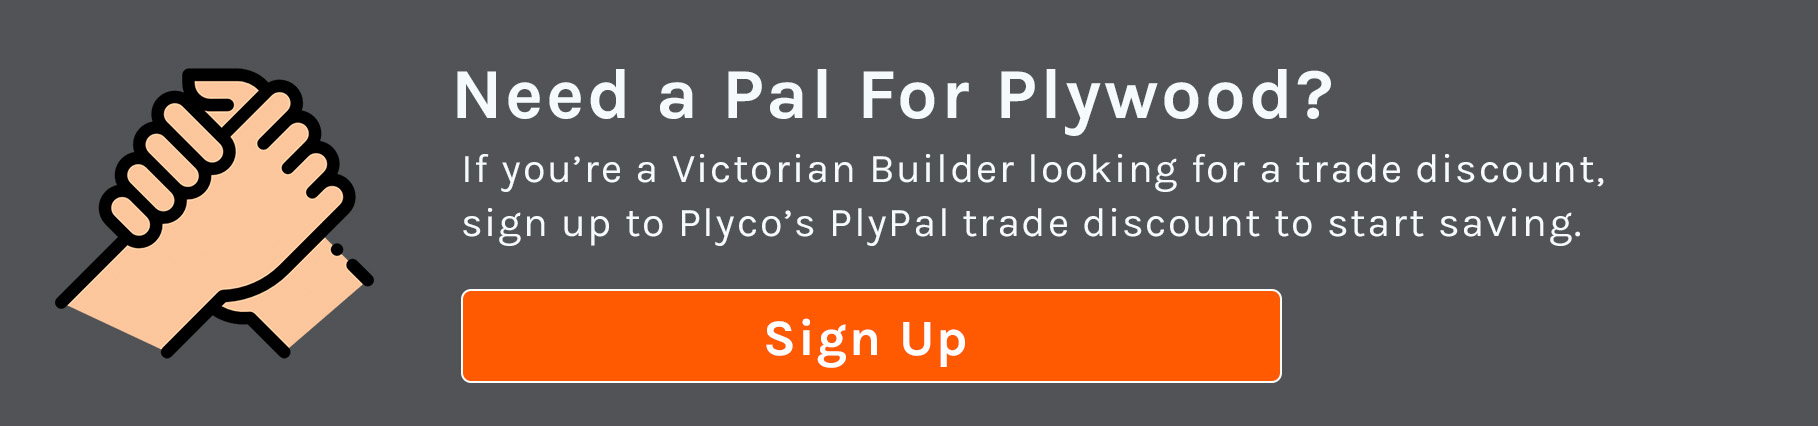 Call to action link for local plywood supplier Plyco's trade discount program